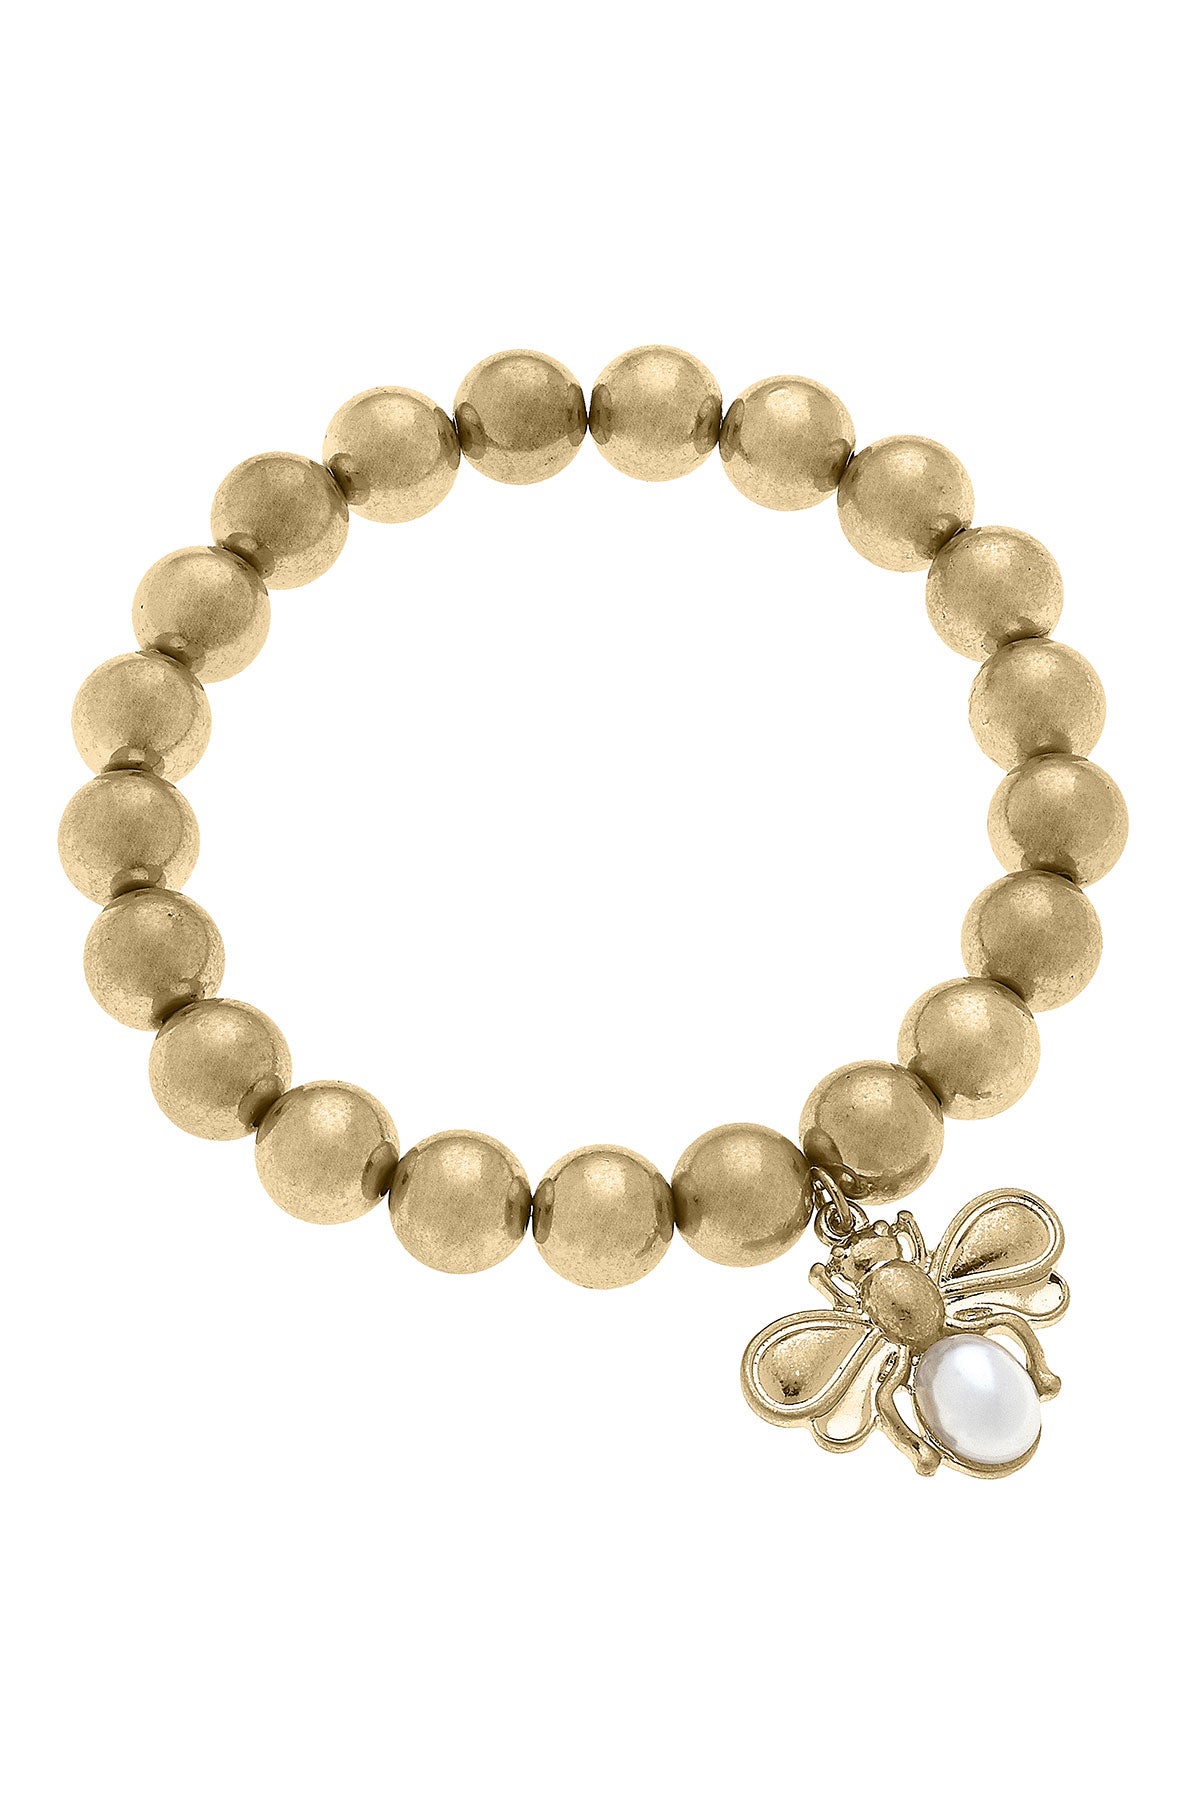 Pearl Bumble Bee Stretch Bracelet in Worn Gold